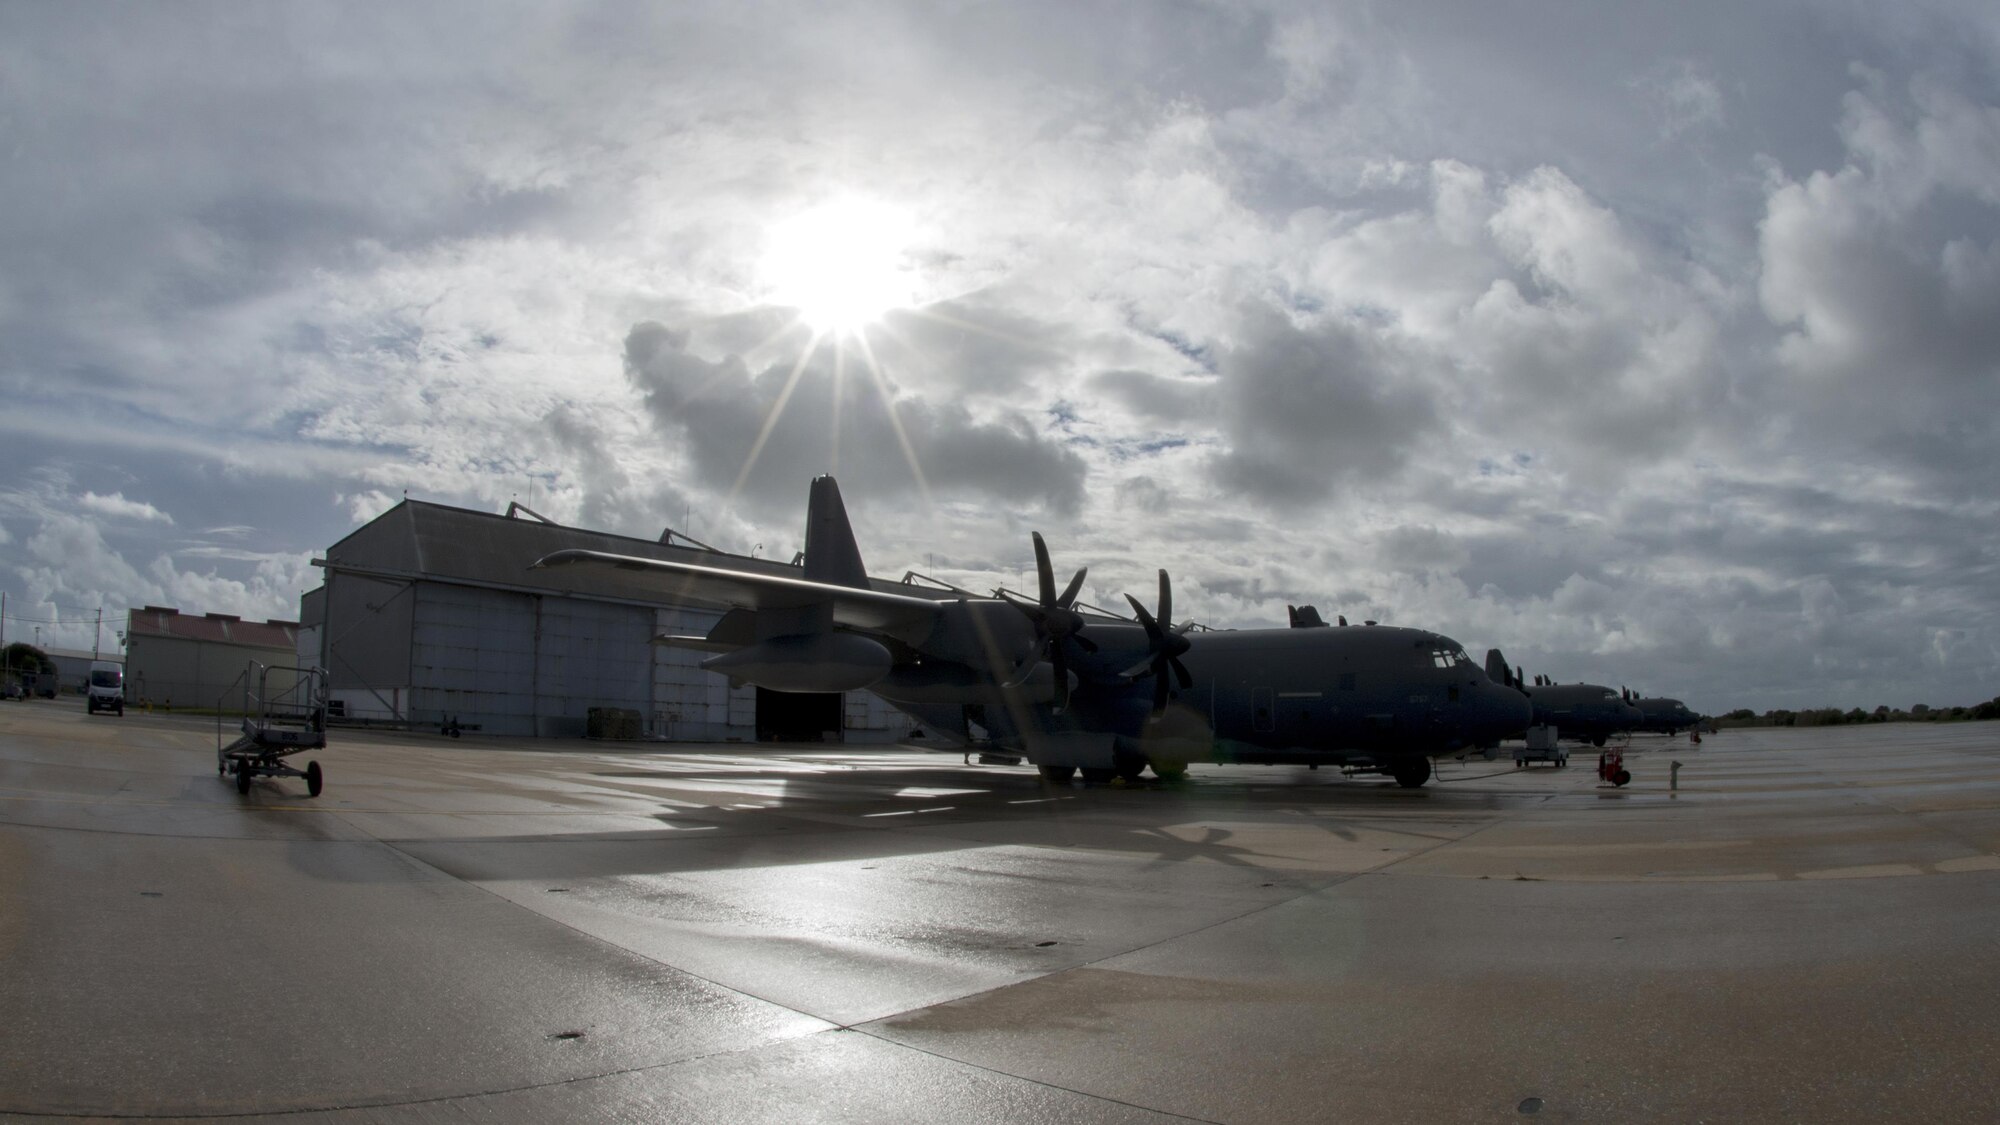 U.S. MC-130J Commando II’s from the 352d Special Operations Wing stand ready at Naval Air Station Rota, Spain in during TRIDENT JUNCTURE, Nov. 2, 2015. TRJE15 tested the NATO Response Force’s air, sea, land and Special Forces capabilities, to ensure that they are adapted to provide an integral part of NATO’s larger toolbox and to safeguard the Alliance’s interests. (U.S. Air Force photo by 1st Lt. Chris Sullivan/Released)